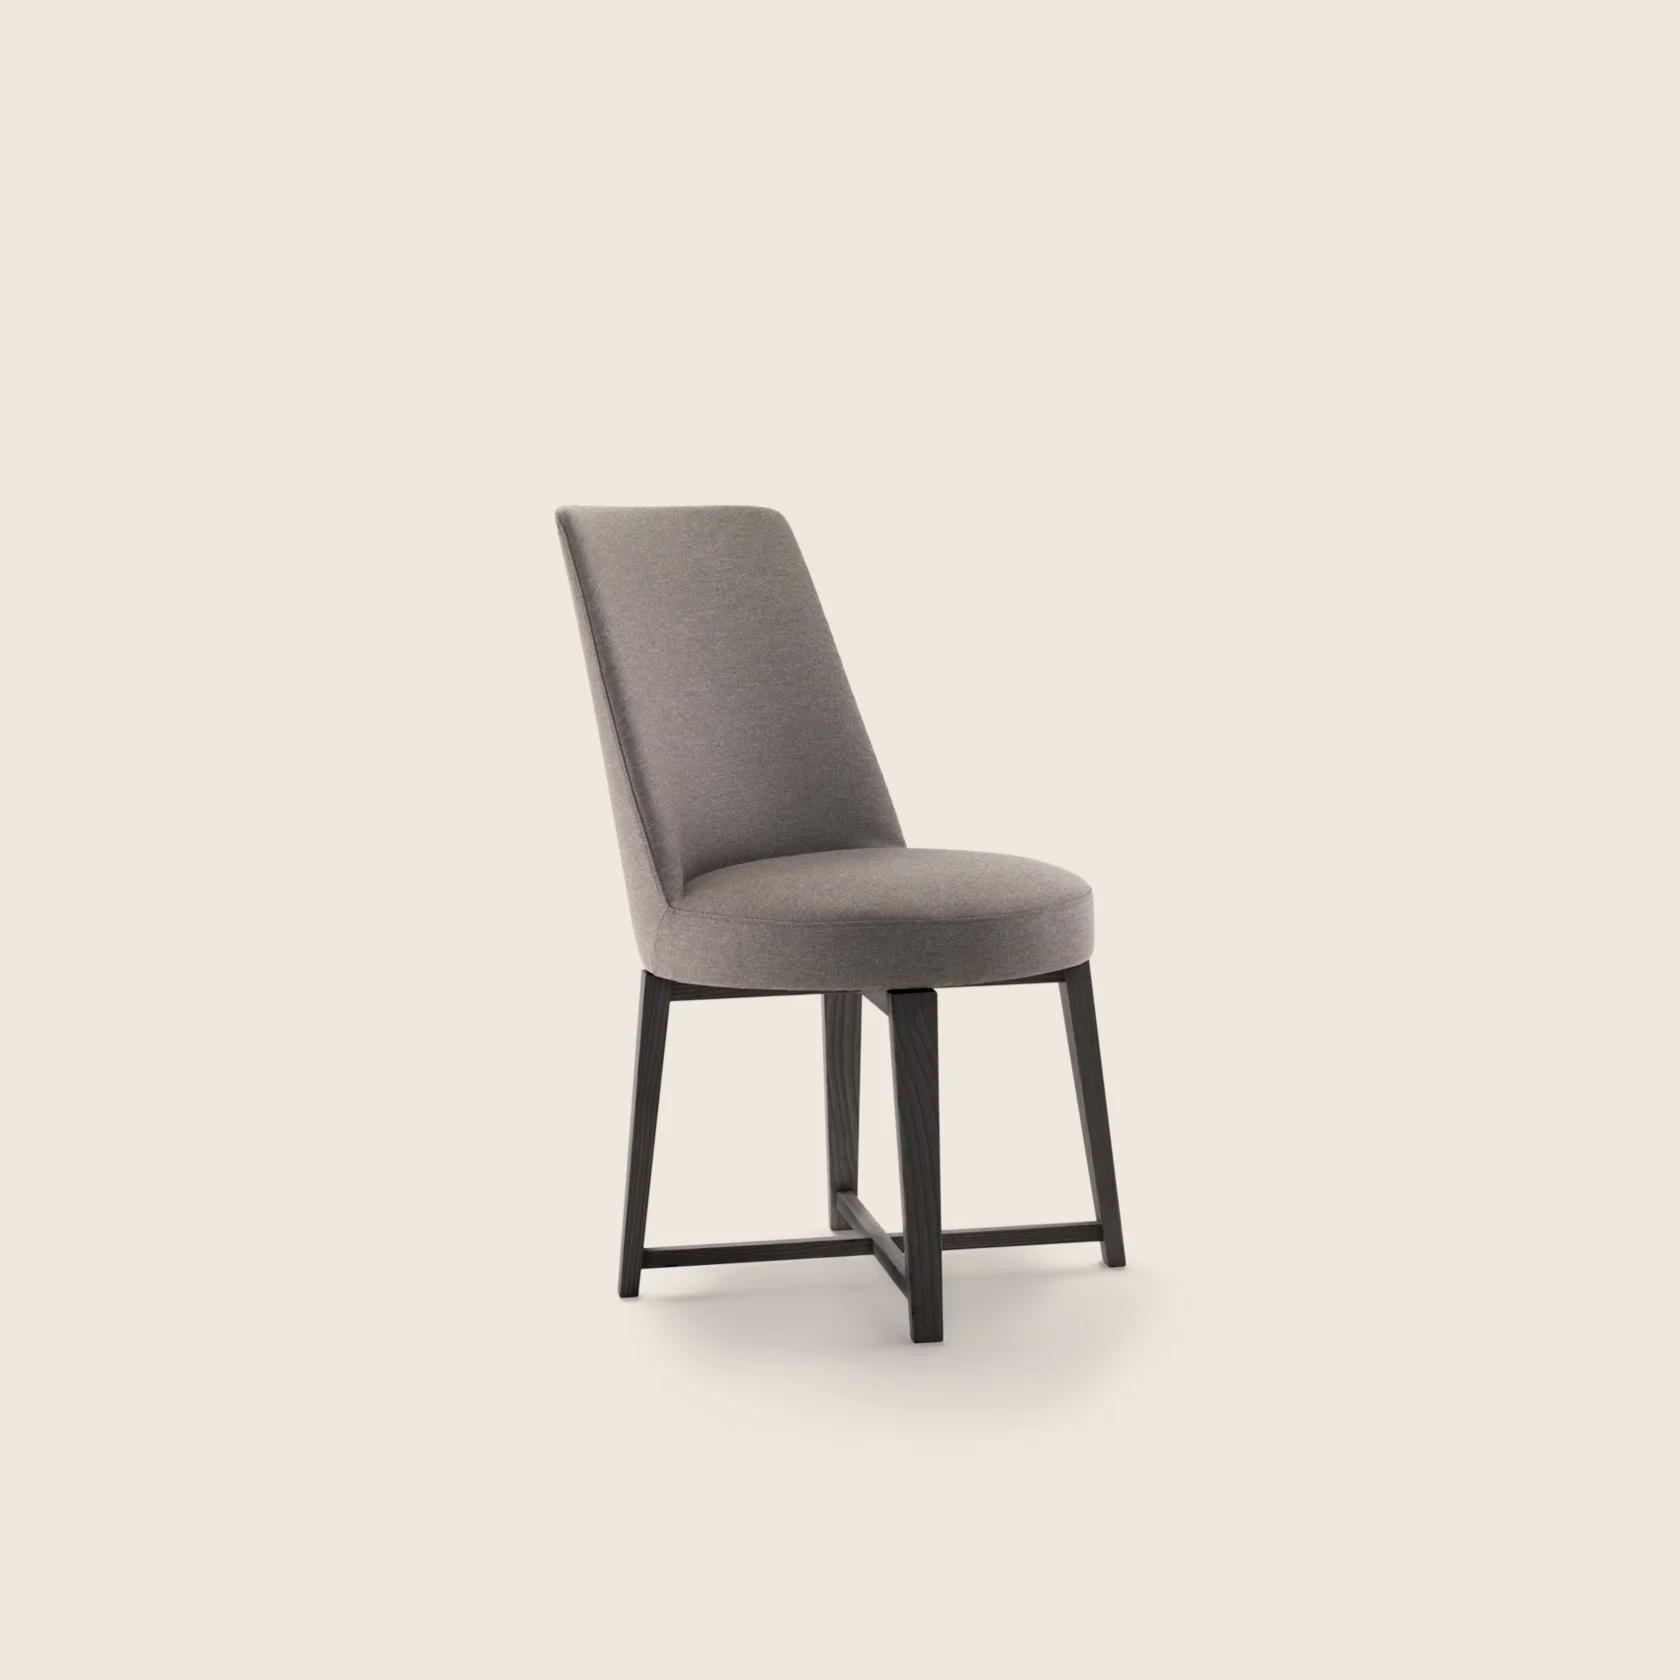 024601_HERA_CHAIR_11.png